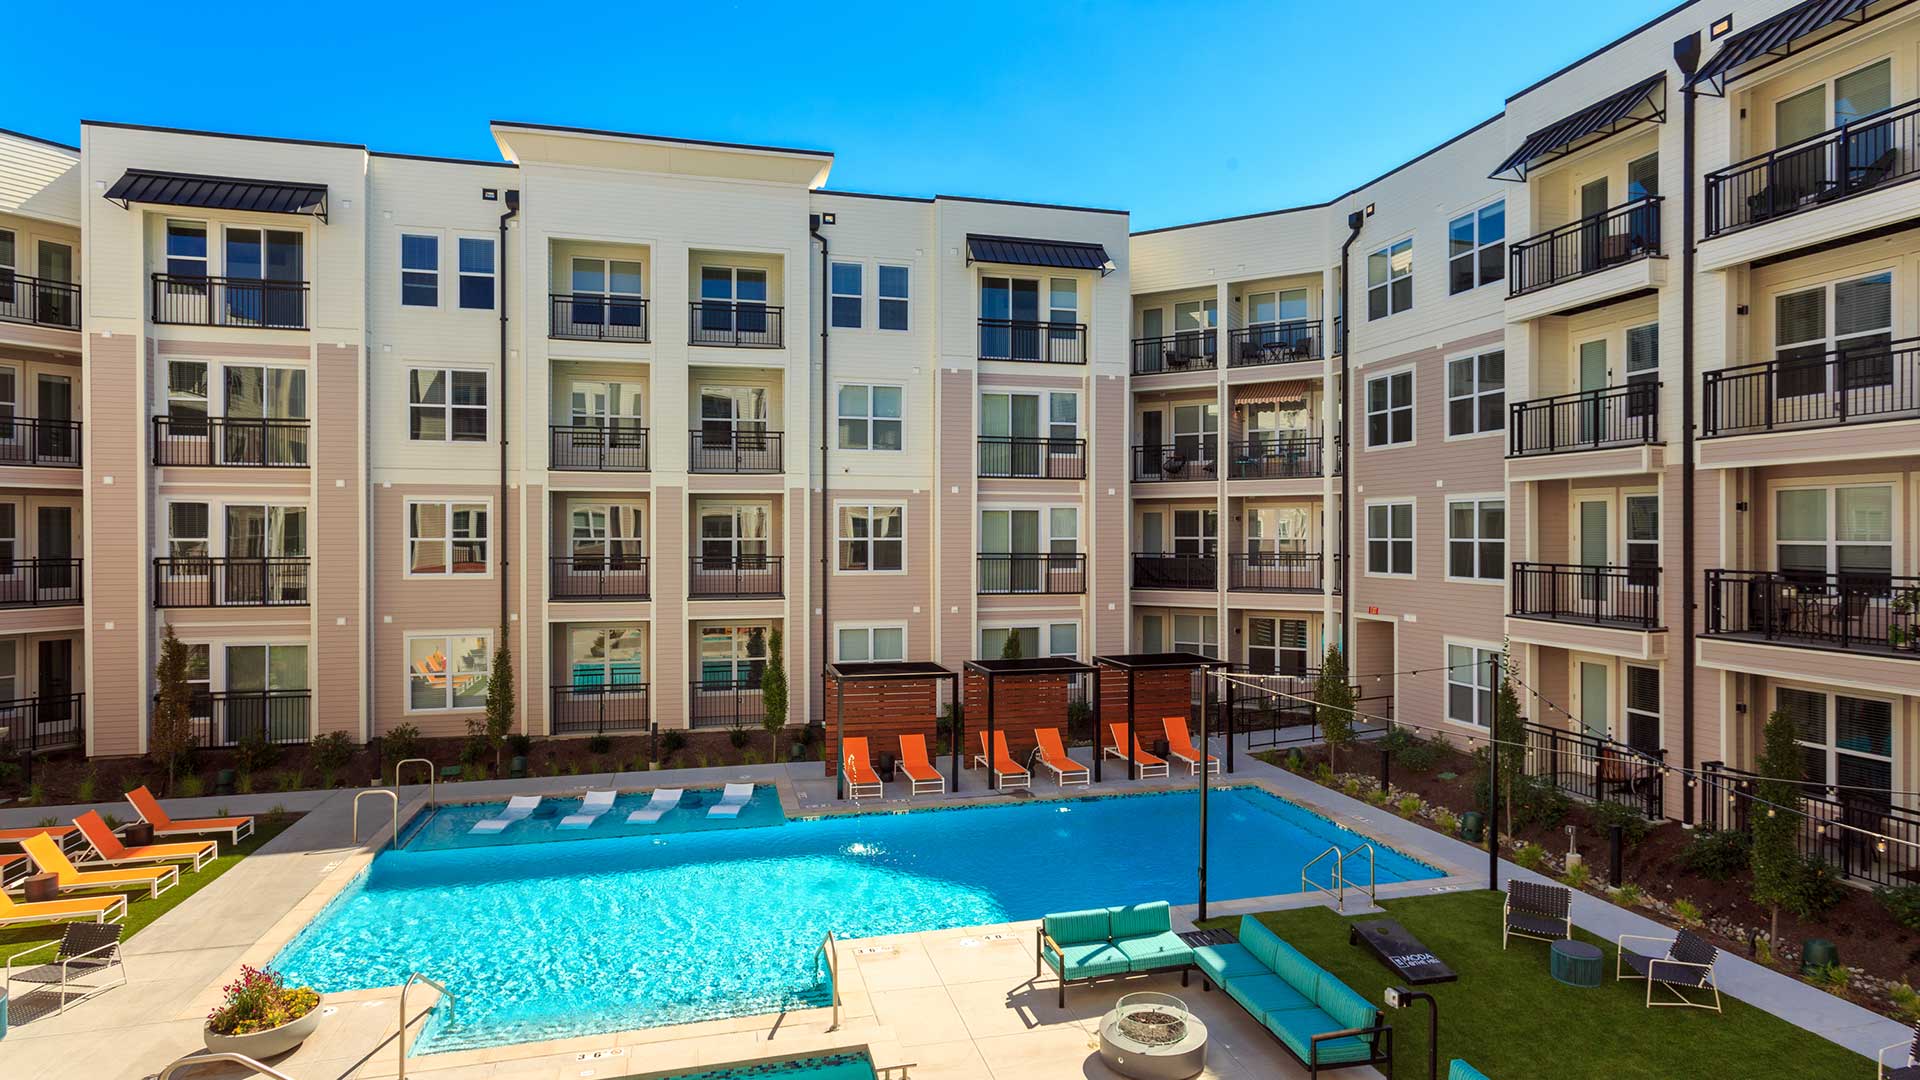 Looking at the amenity courtyard from above. The pool is below, surrounded by lounge chairs. There is outdoor couches and a game area just below to the right. The apartment building surrounds the scene.